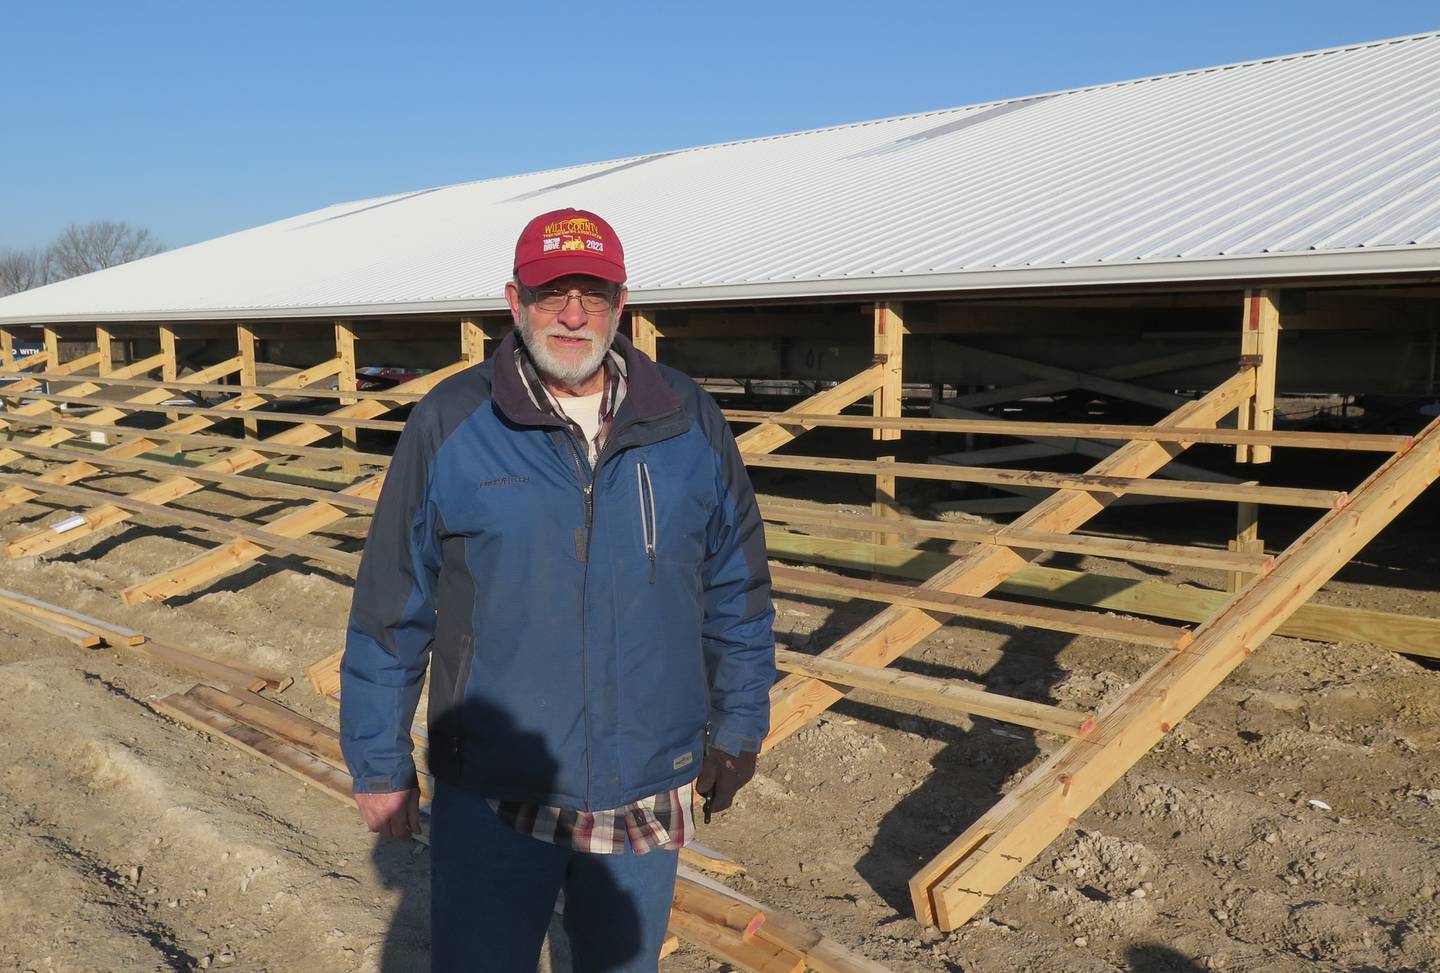 Everett Hauert explains the unique construction process for his 60-foot by 200-foot pole barn in the early phrase of lifting the roof to its 16-foot peak height.